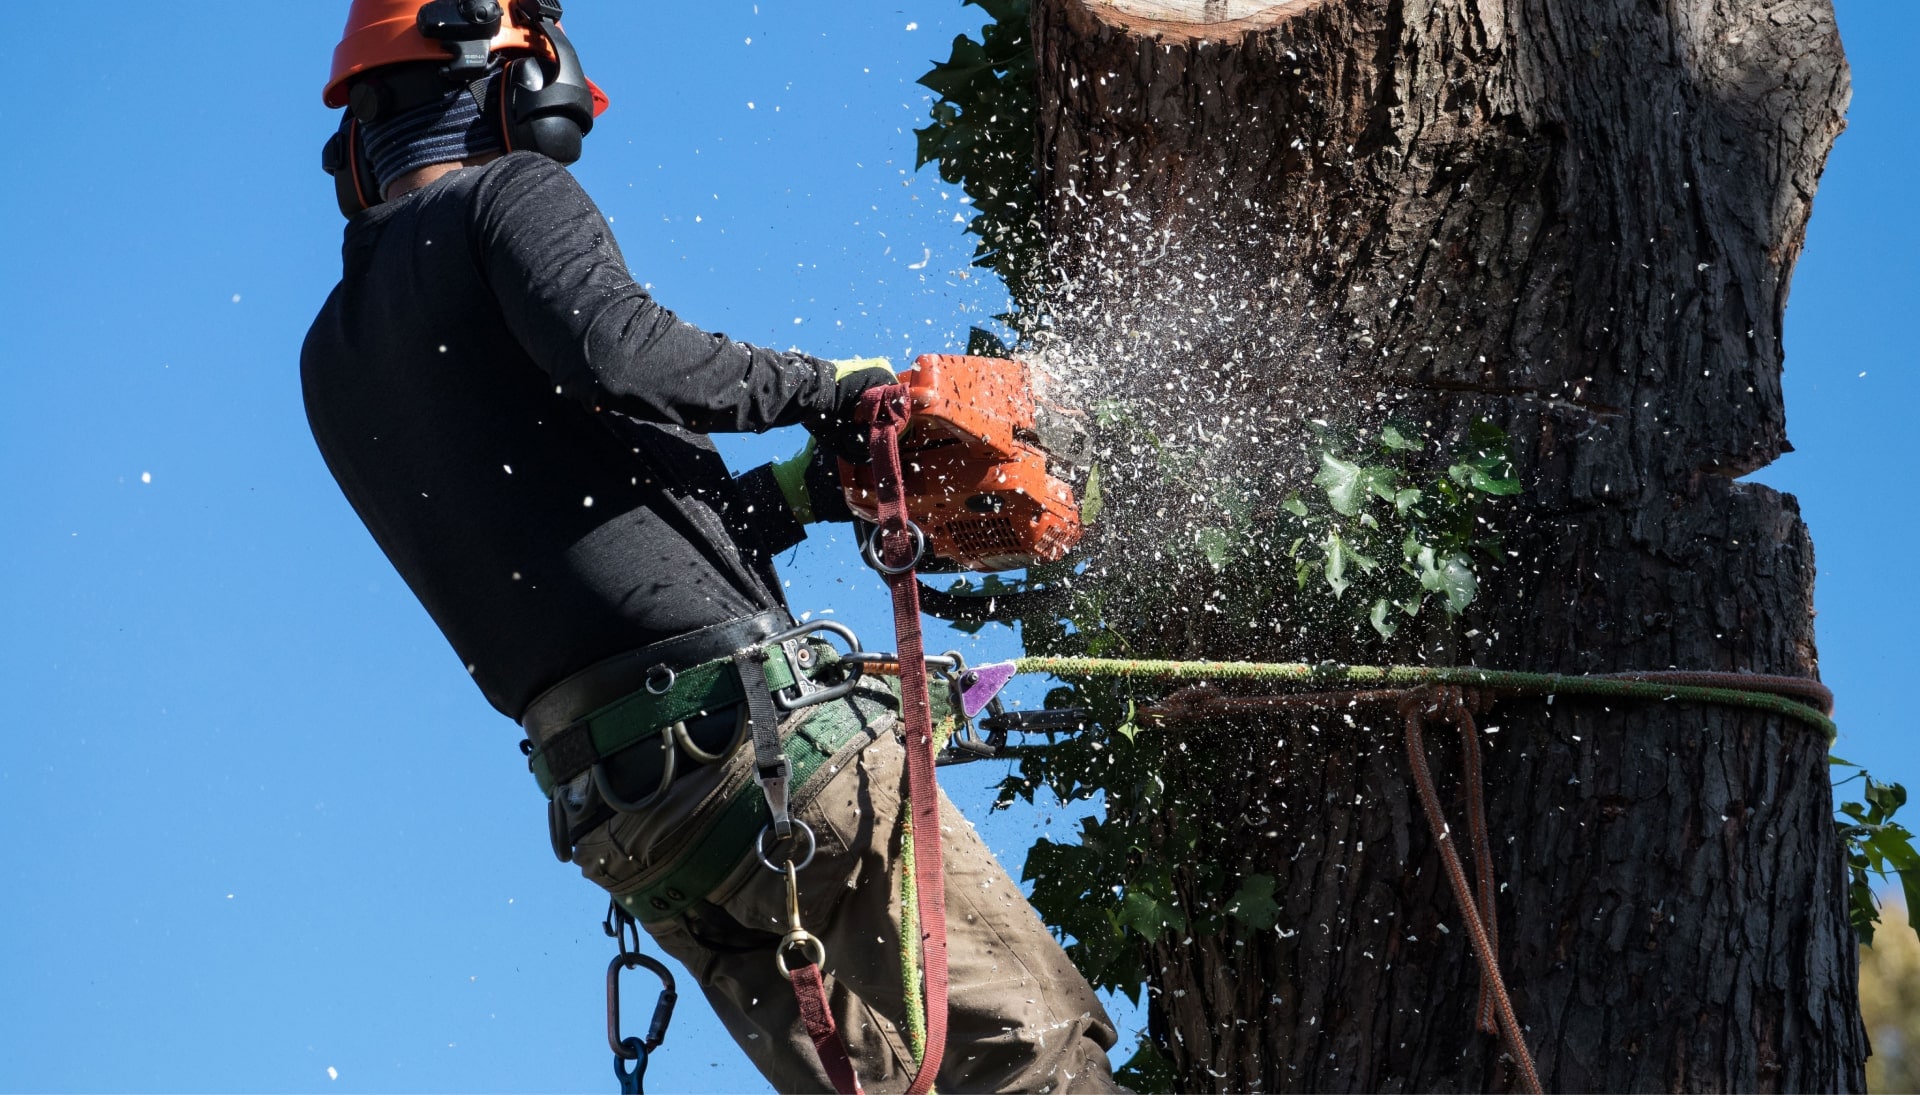 tree-removal-solutions-min-min in Coon Rapids